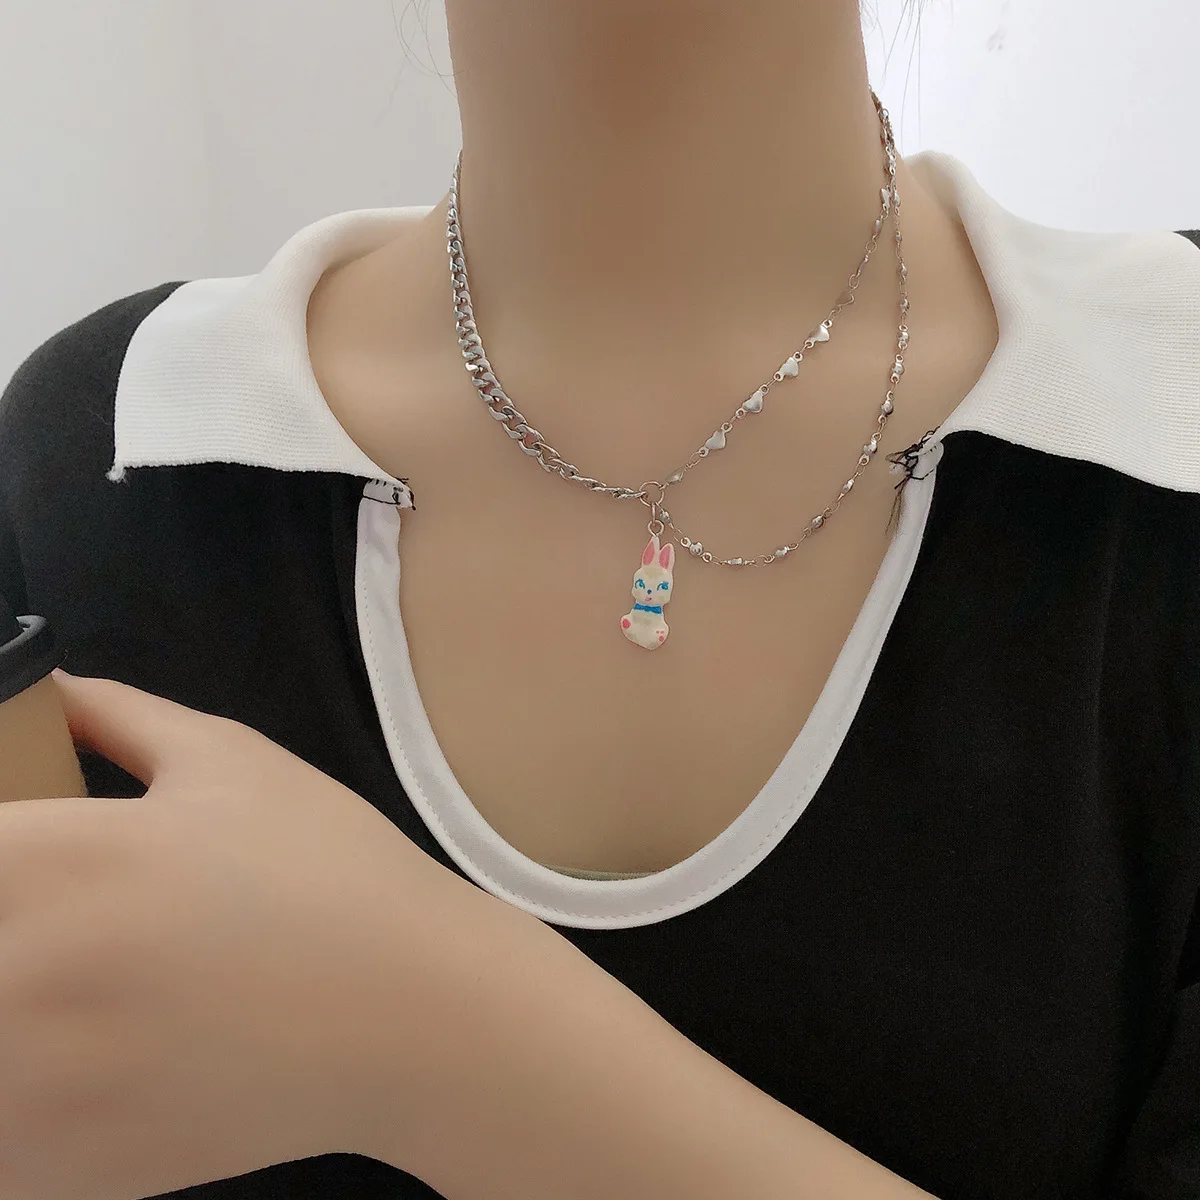 Iced Out Zircon Heart Diamond Heart Pendant Necklace Elegant Silver Y2K  Style Magnetic Necklaces For Women 230908 From Ren03, $8.57